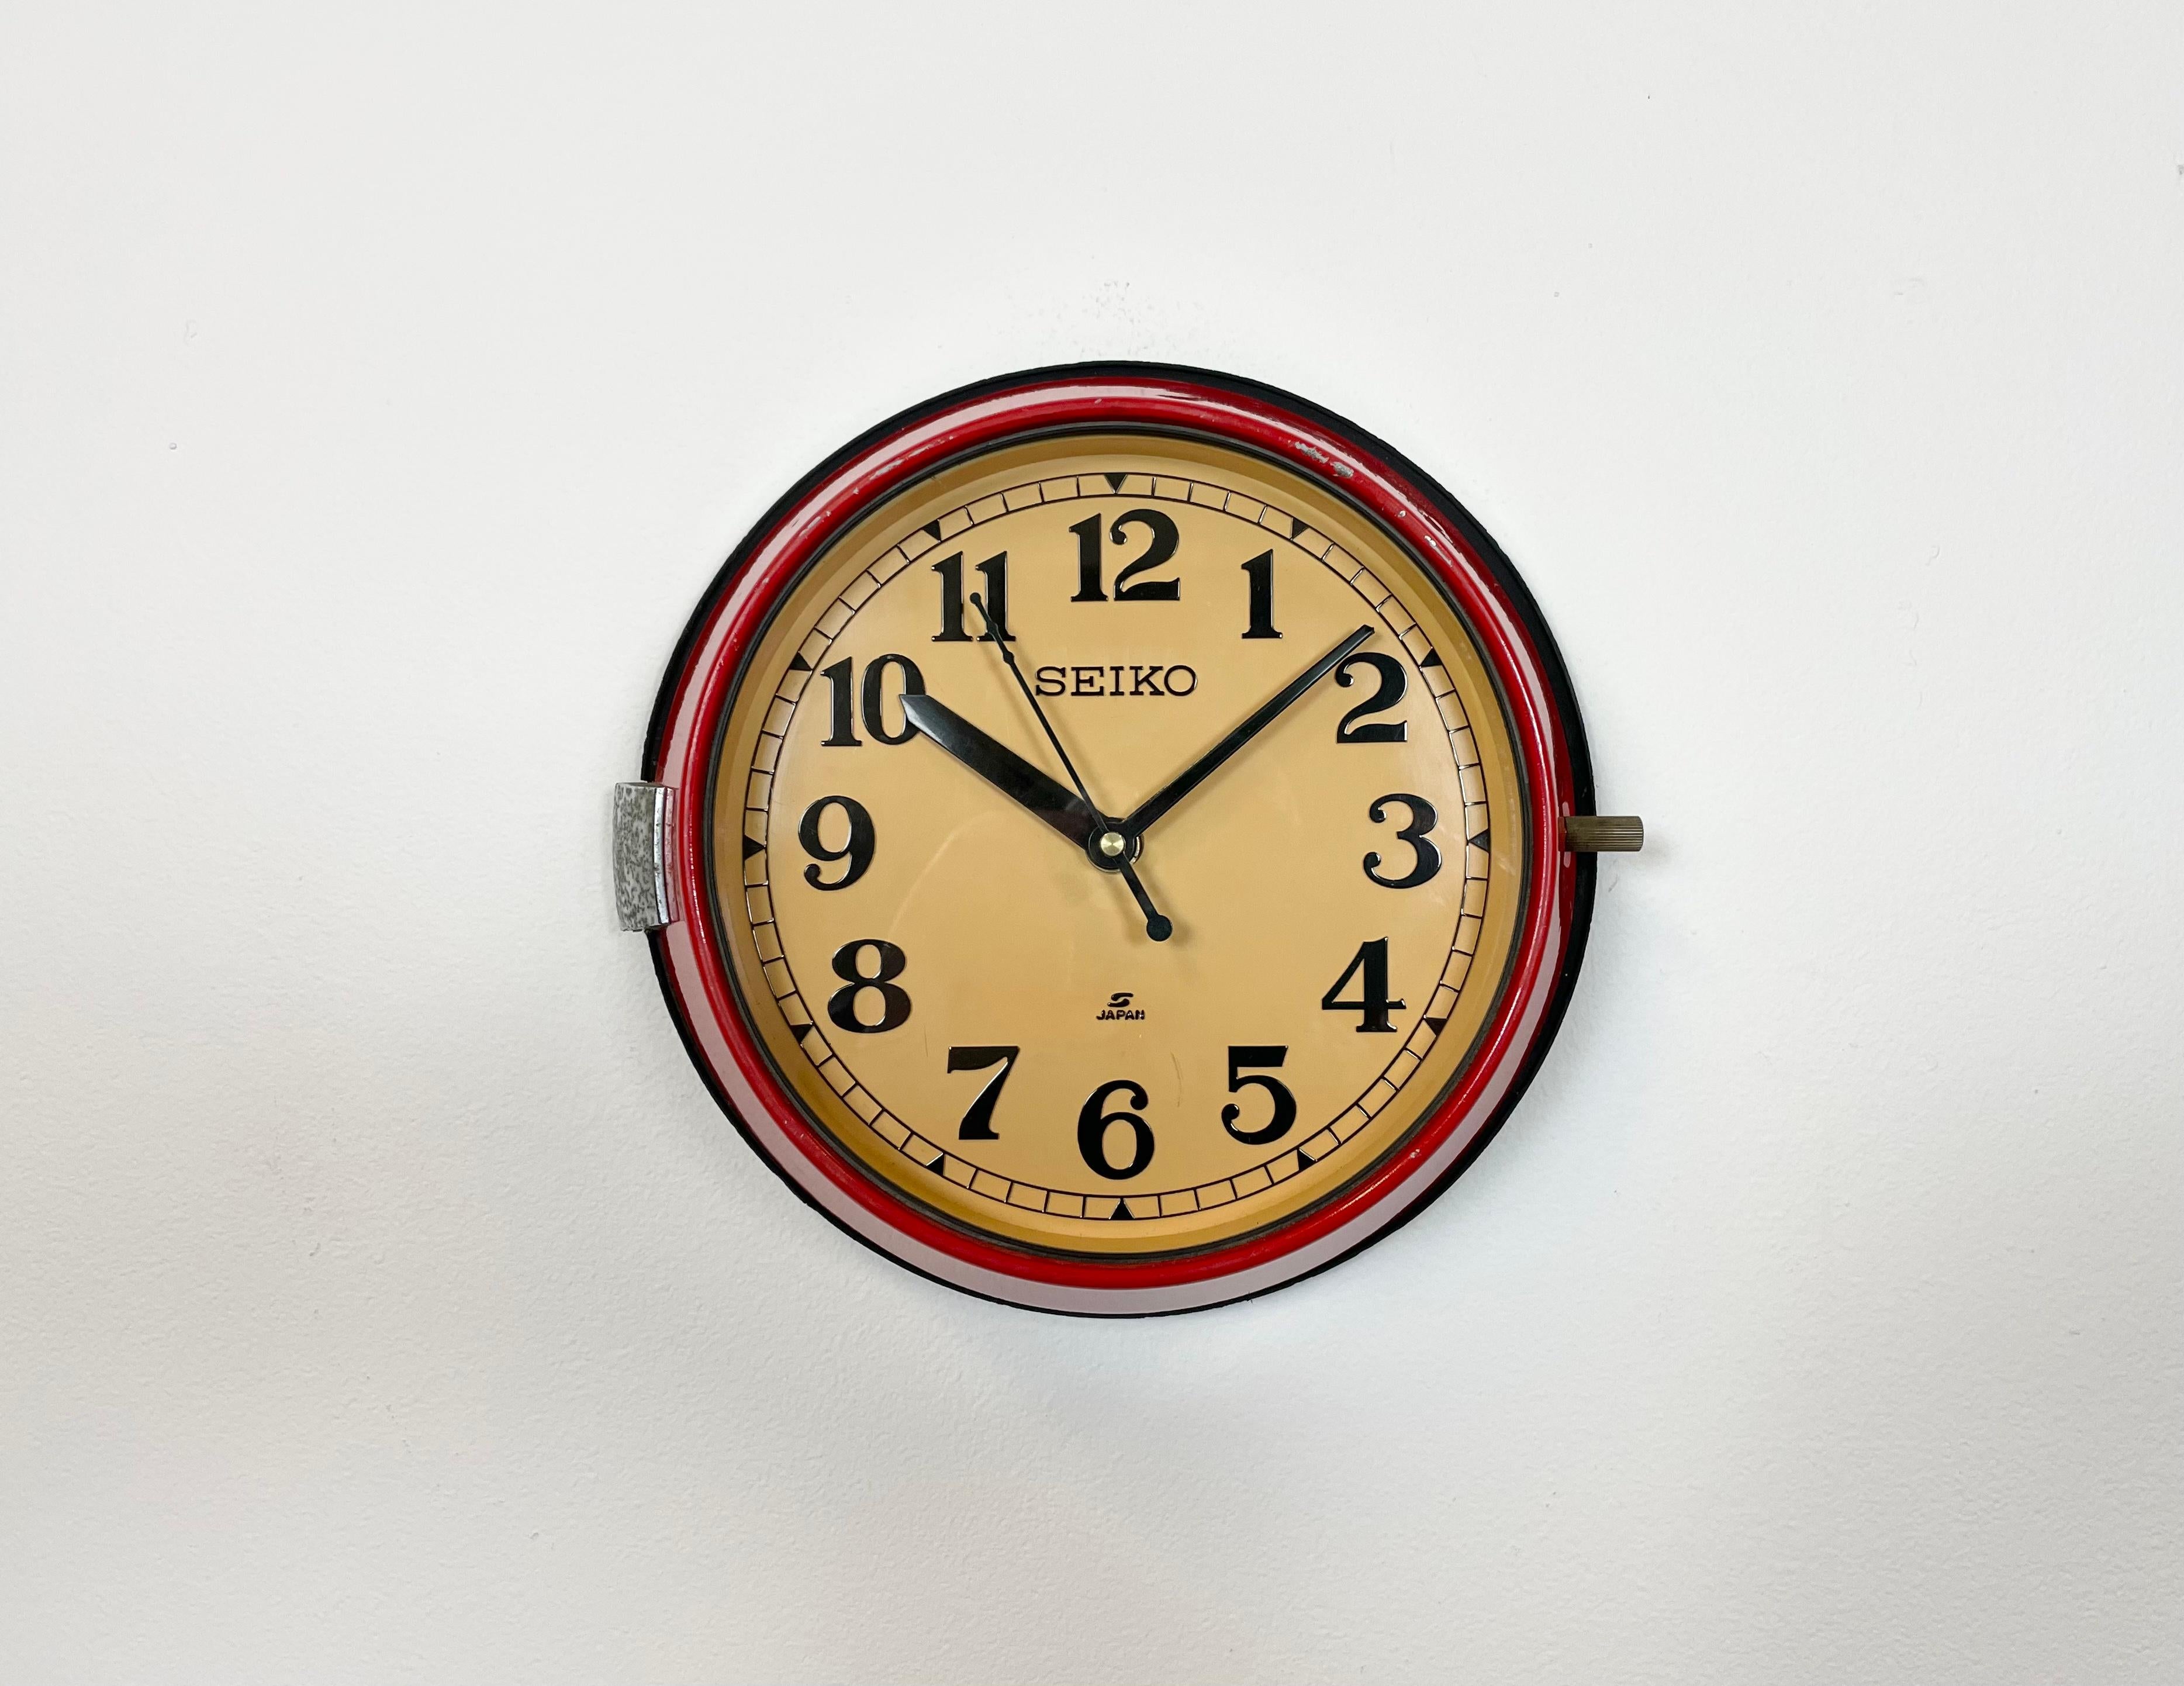 Vintage Seiko navy slave clock designed during the 1970s and produced till 1990s. These clocks were used on large Japanese tankers and cargo ships. It features a red metal frame, a plastic dial and clear glass cover. This item has been converted